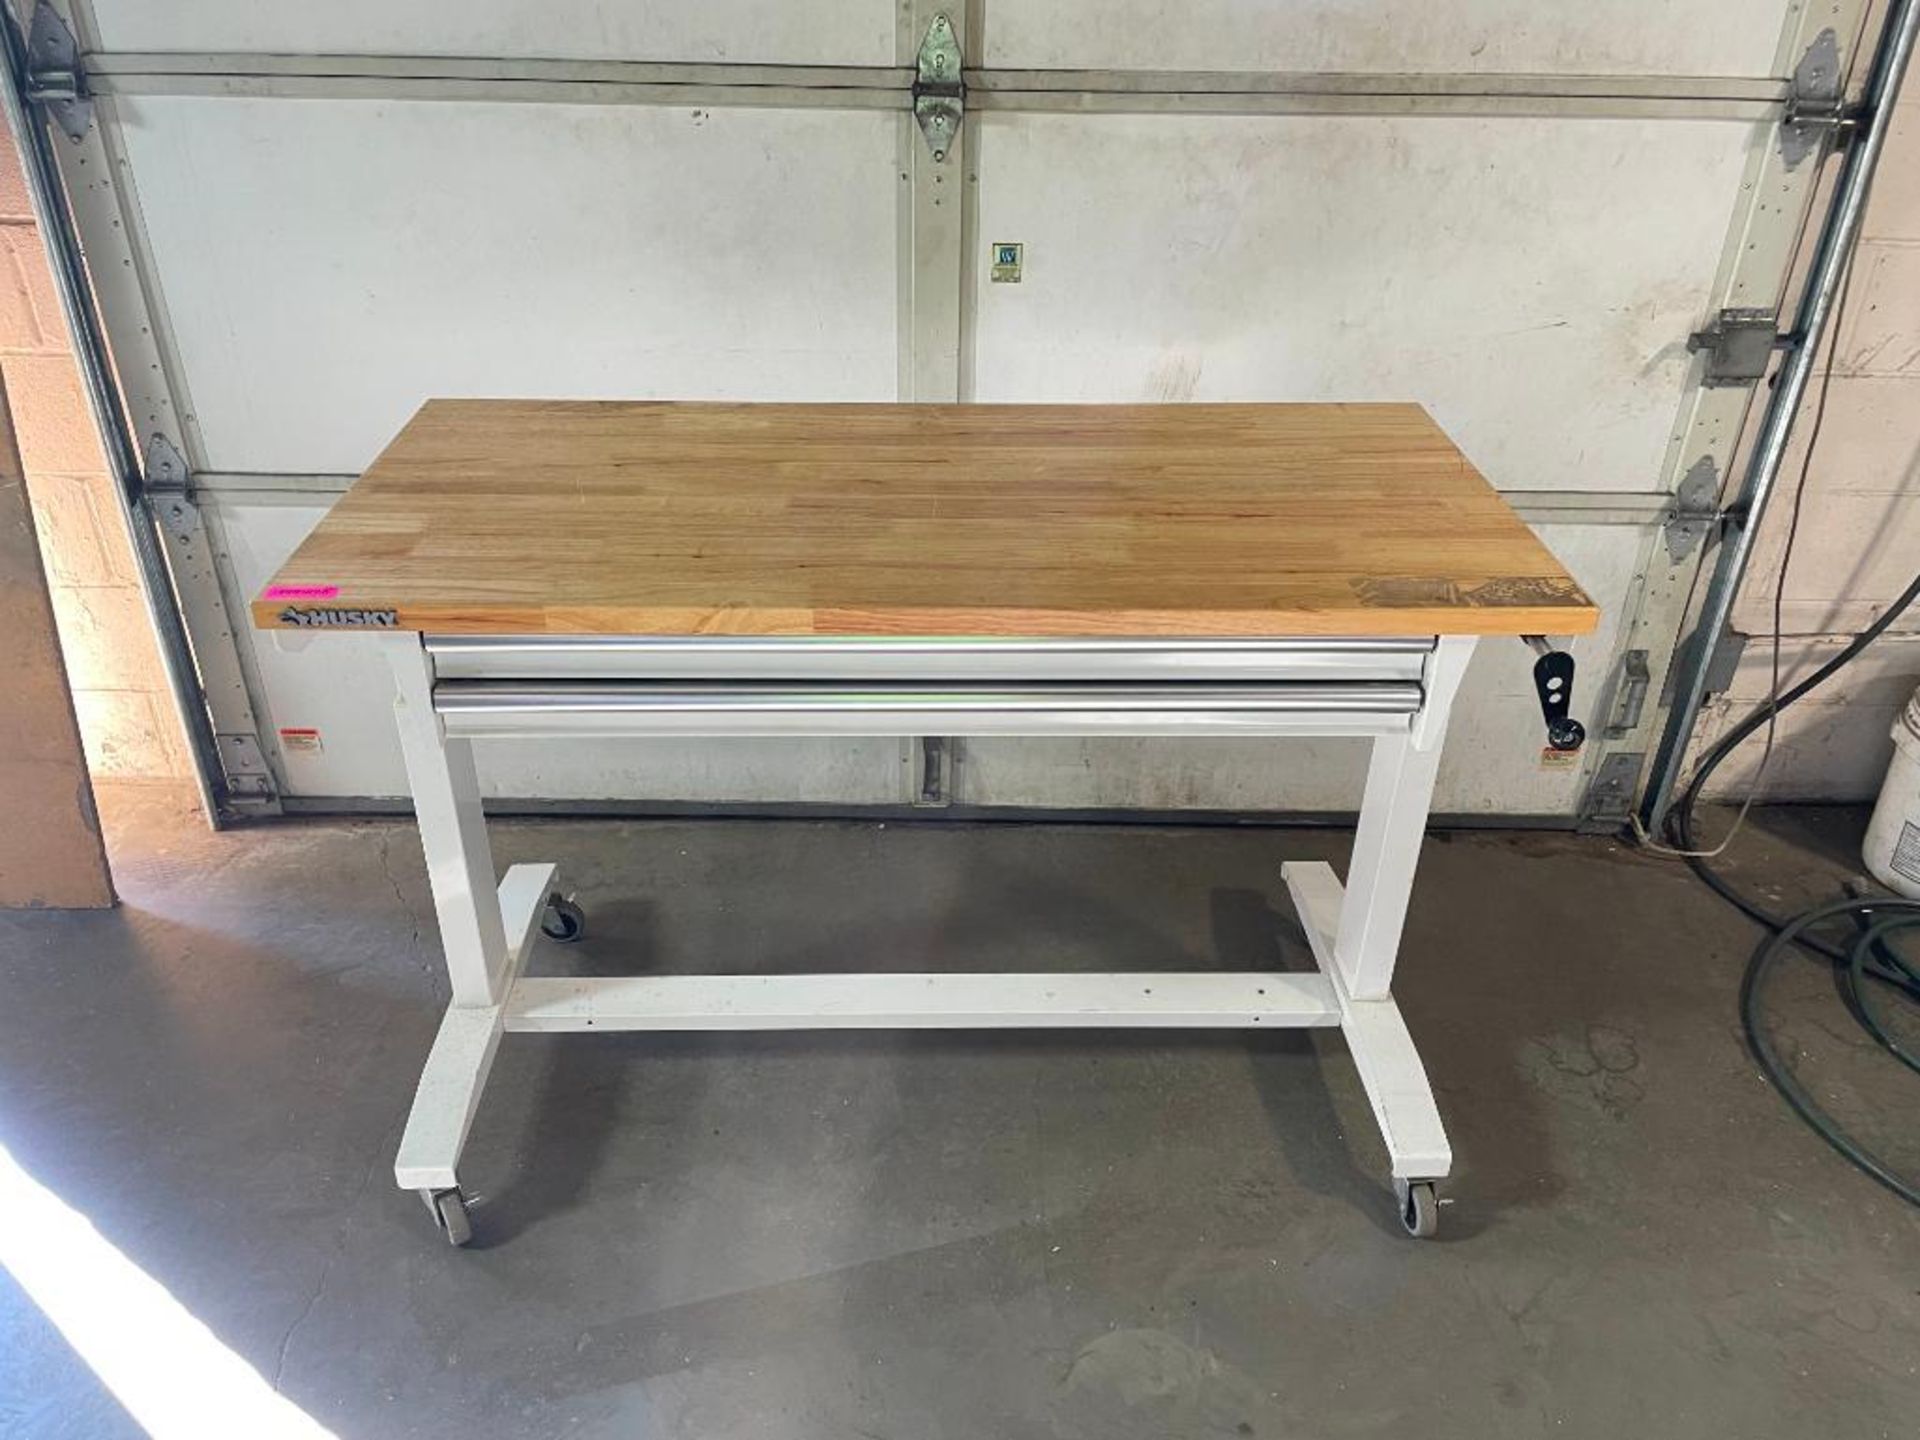 52" ADJUSTABLE HEIGHT WORKBENCH TABLE W/ 2-DRAWERS IN WHITE BRAND/MODEL: HUSKY SIZE: 52" X 24" QTY: - Image 3 of 7